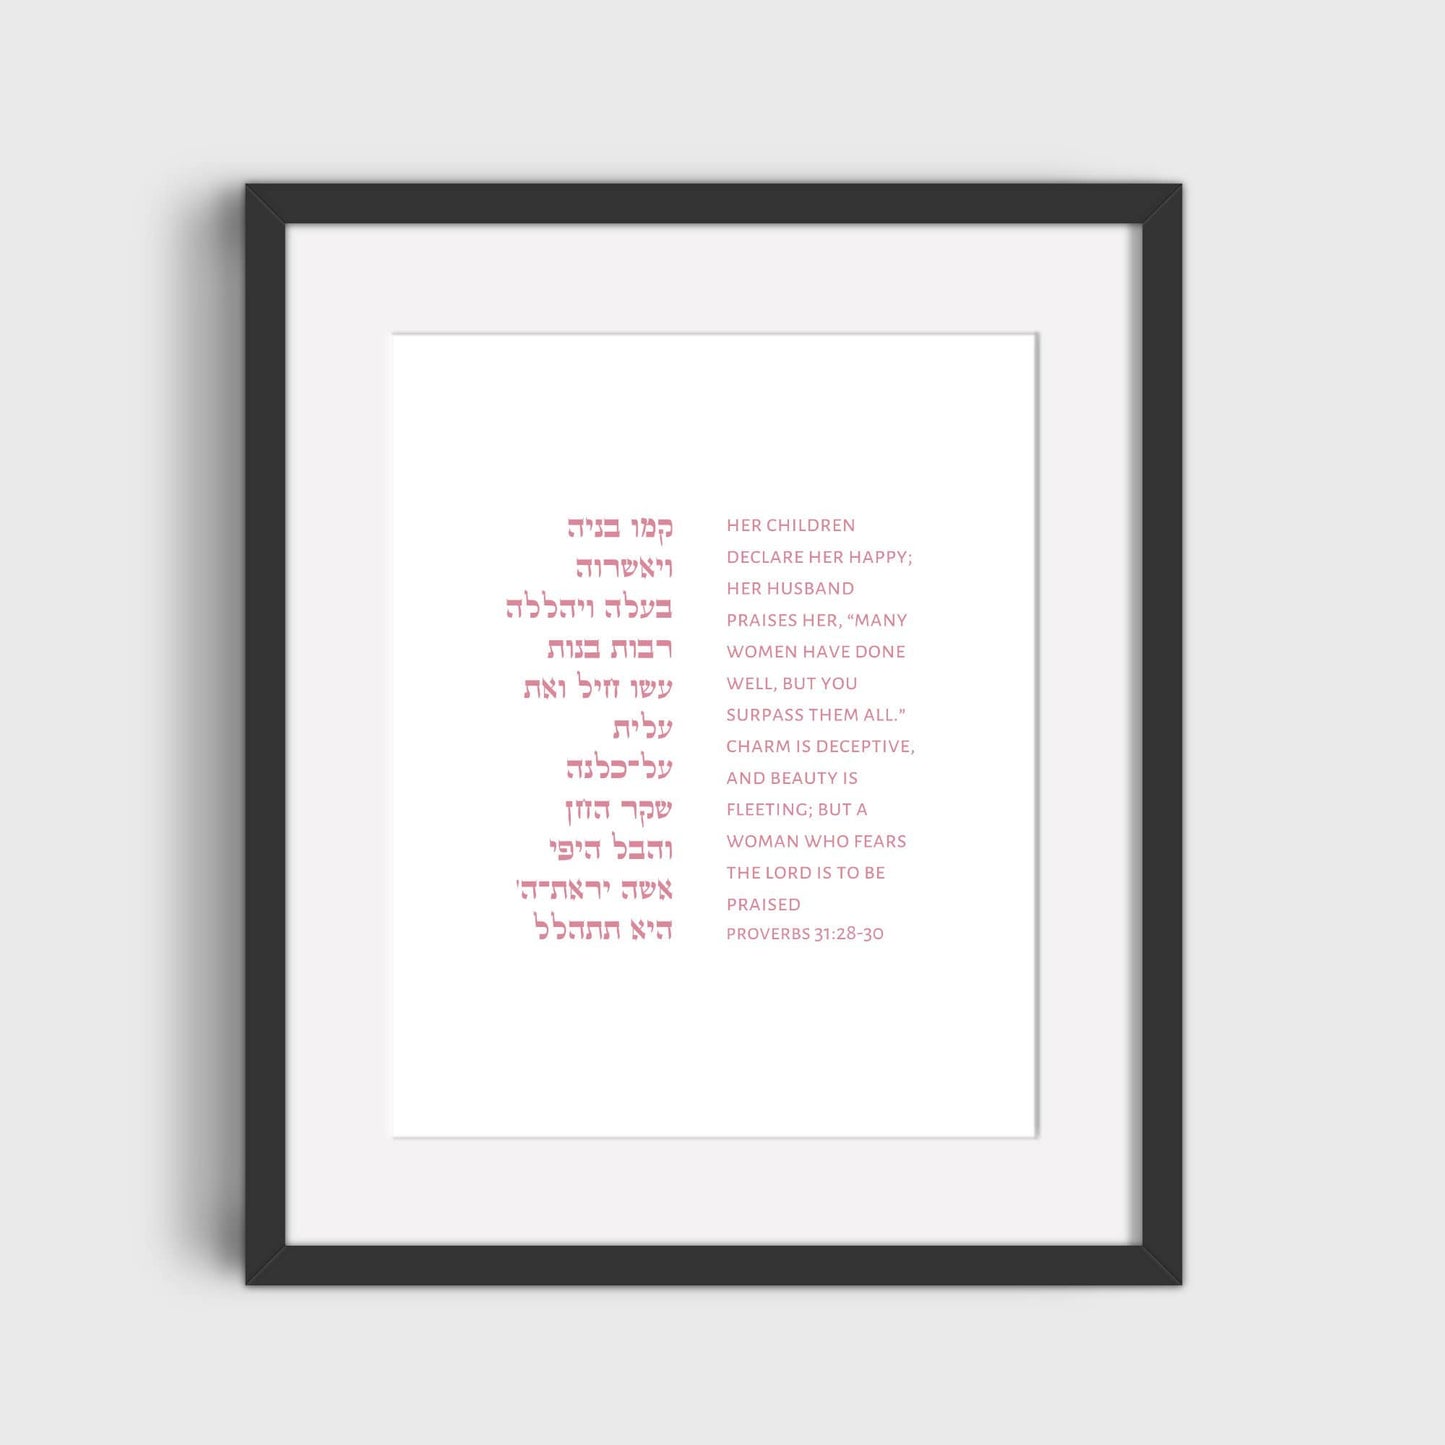 The Verse Proverbs 31:28-30 Proverbs 31:28-30 | Jewish Gifts Judaica Art for Wife Mother Grandmother